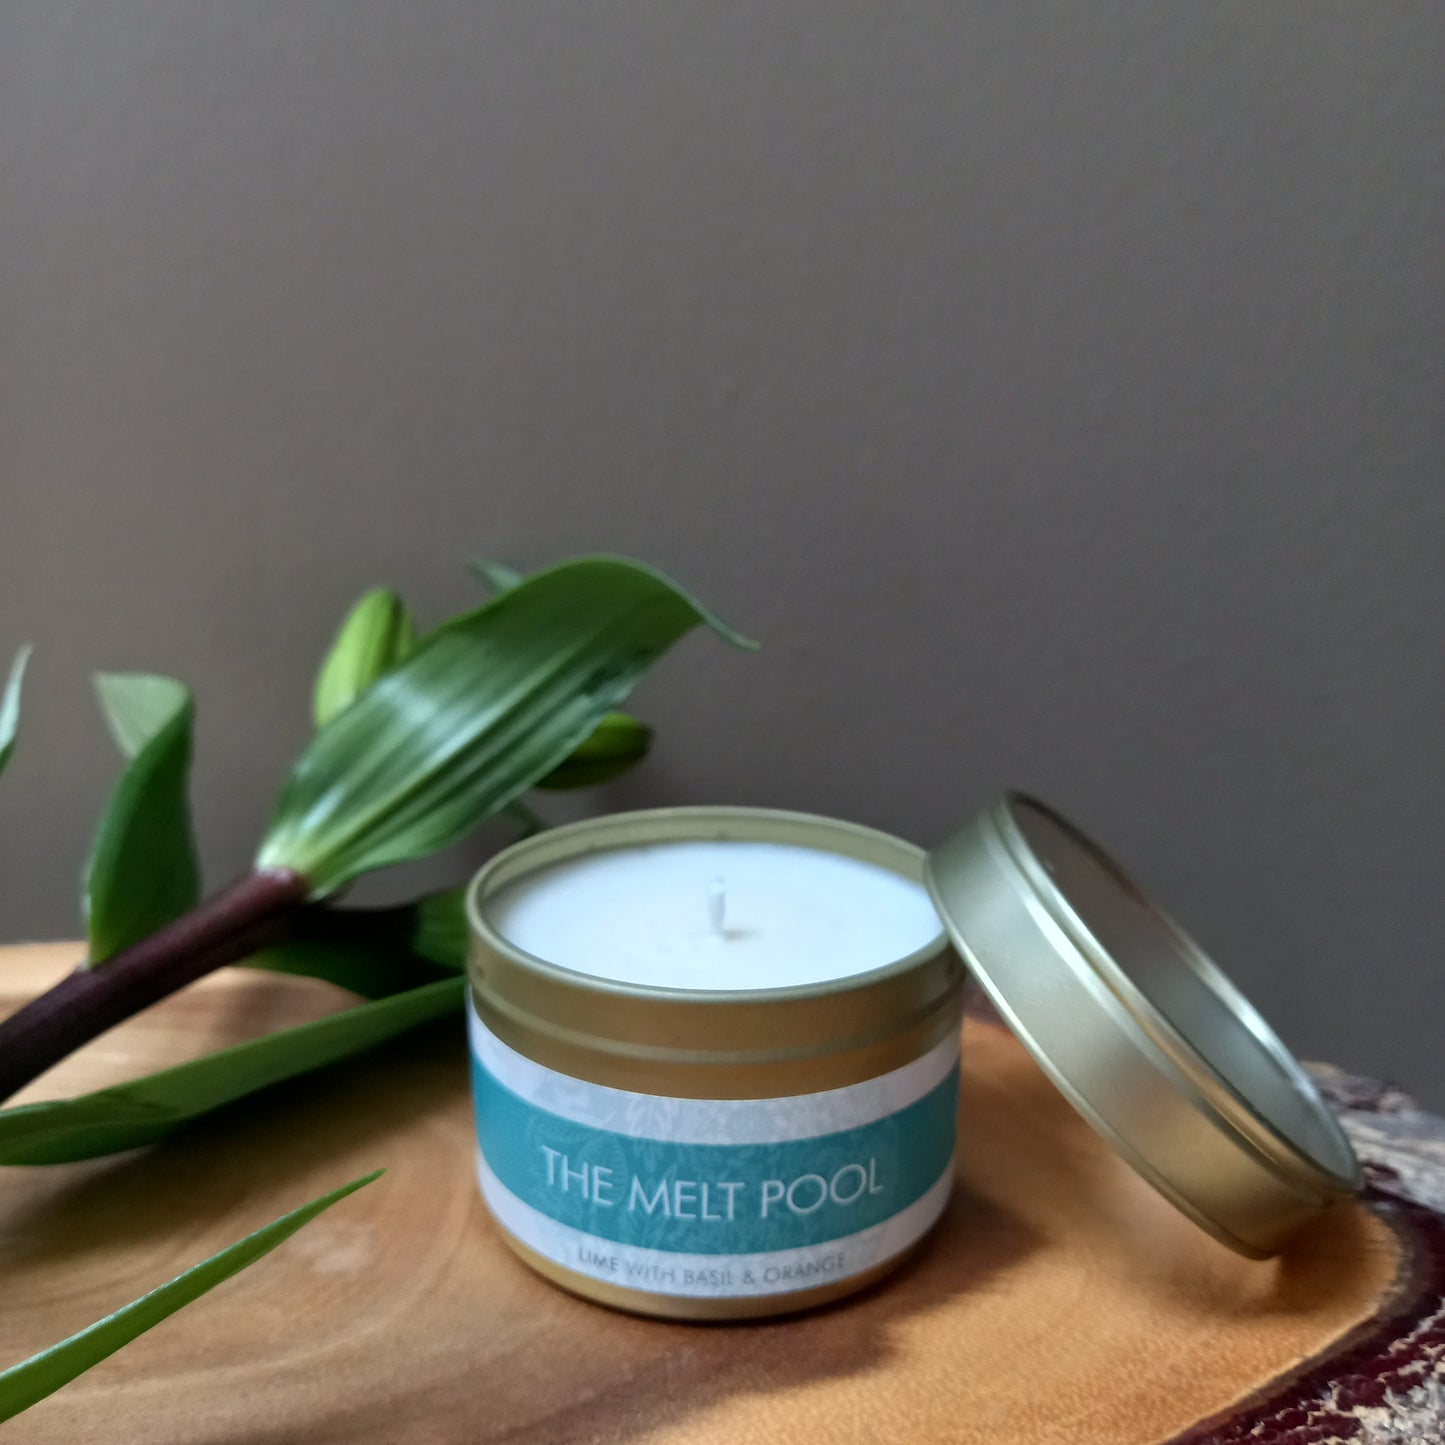 Lime with Basil & Orange - Small Travel Tin Candle